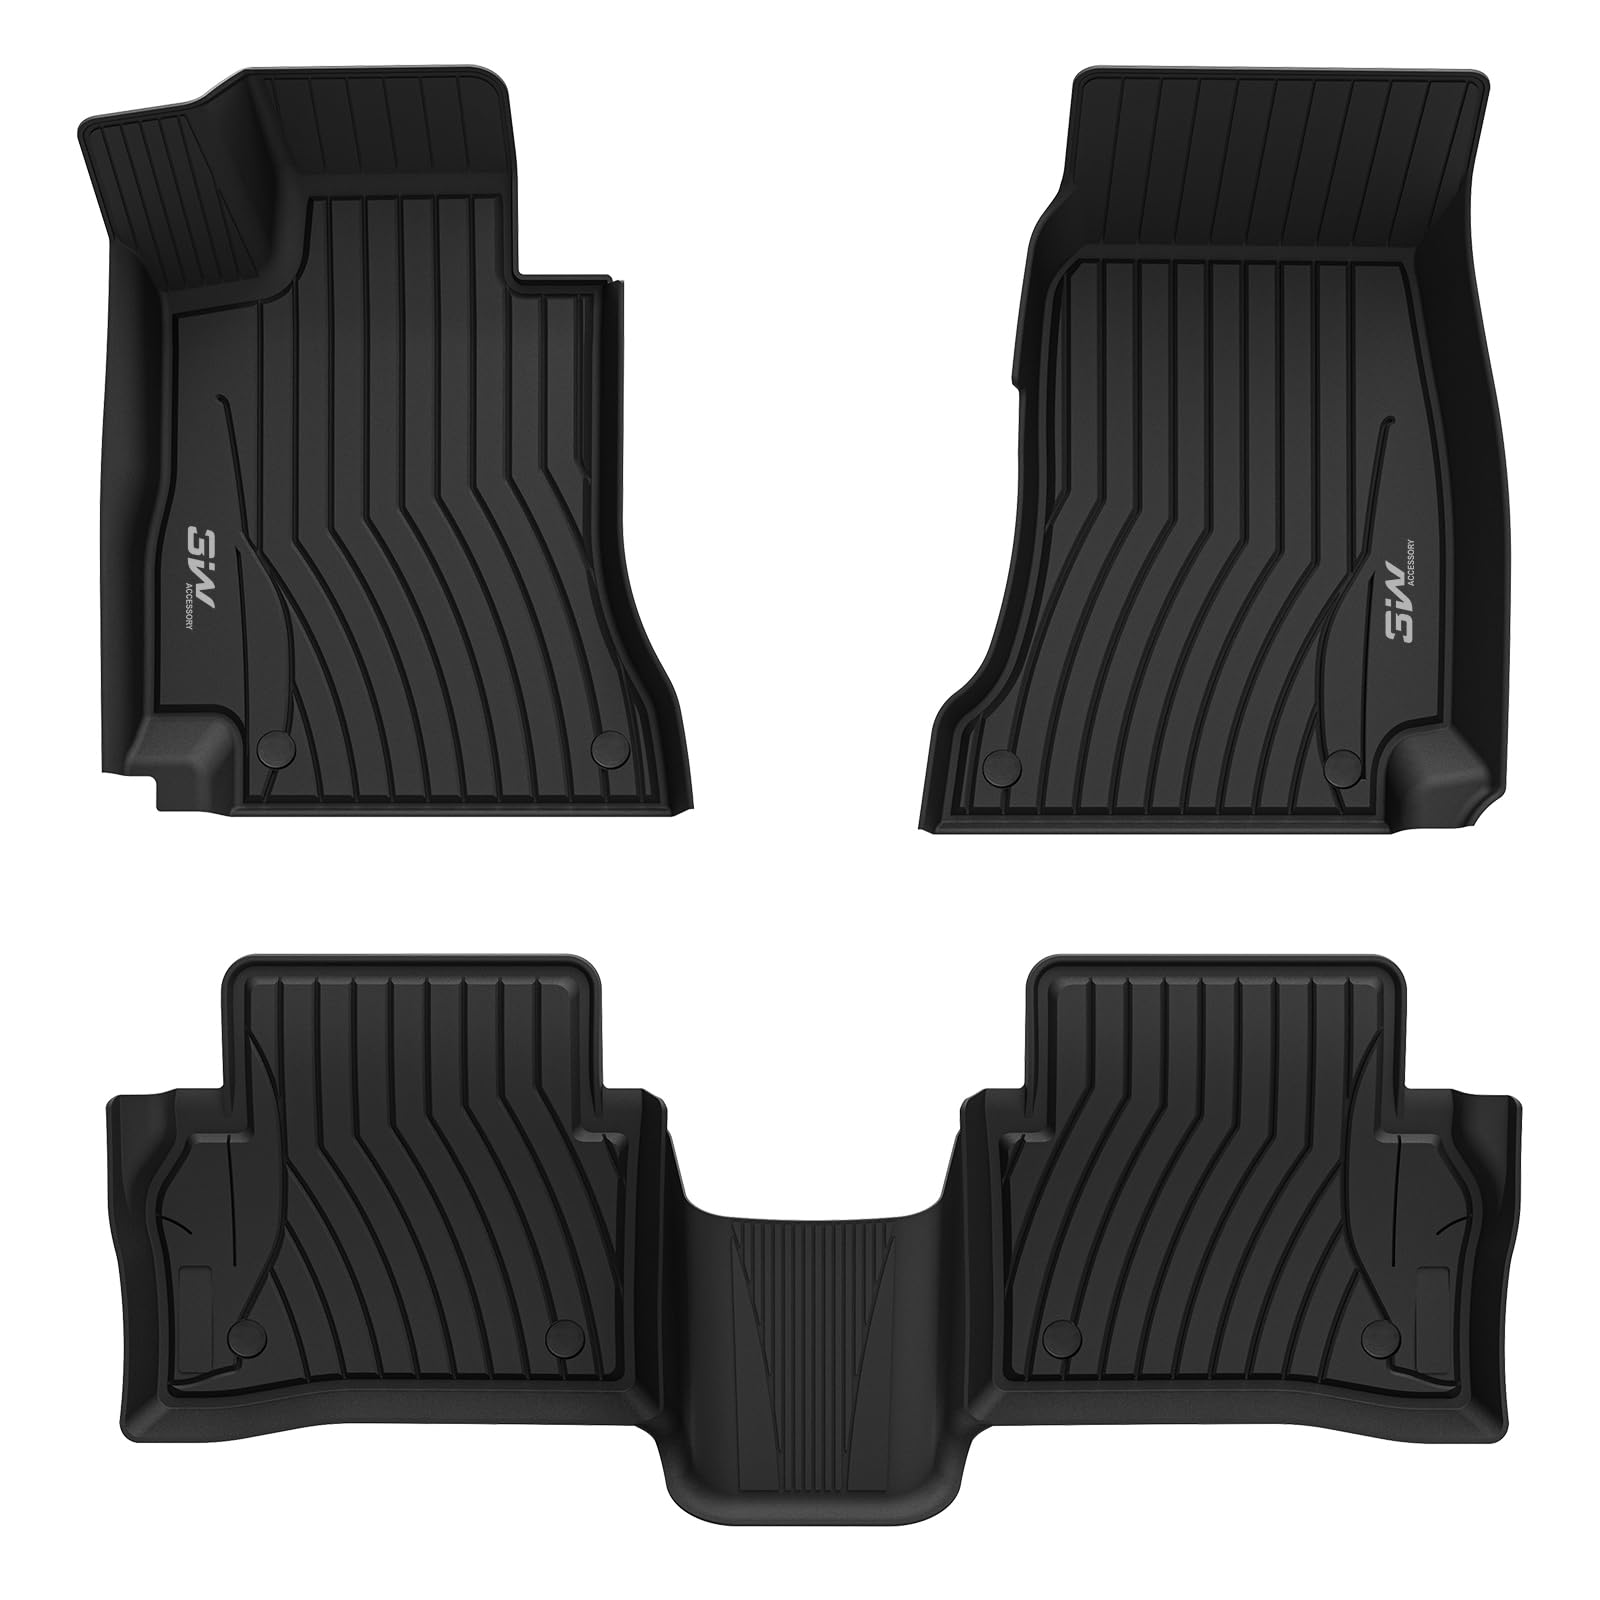 3W Mercedes-Benz E-Class 2017-2022 Custom Floor Mats TPE Material & All-Weather Protection Vehicles & Parts 3Wliners 2017-2022 E-Class 2017-2022 1st&2nd Row Mats